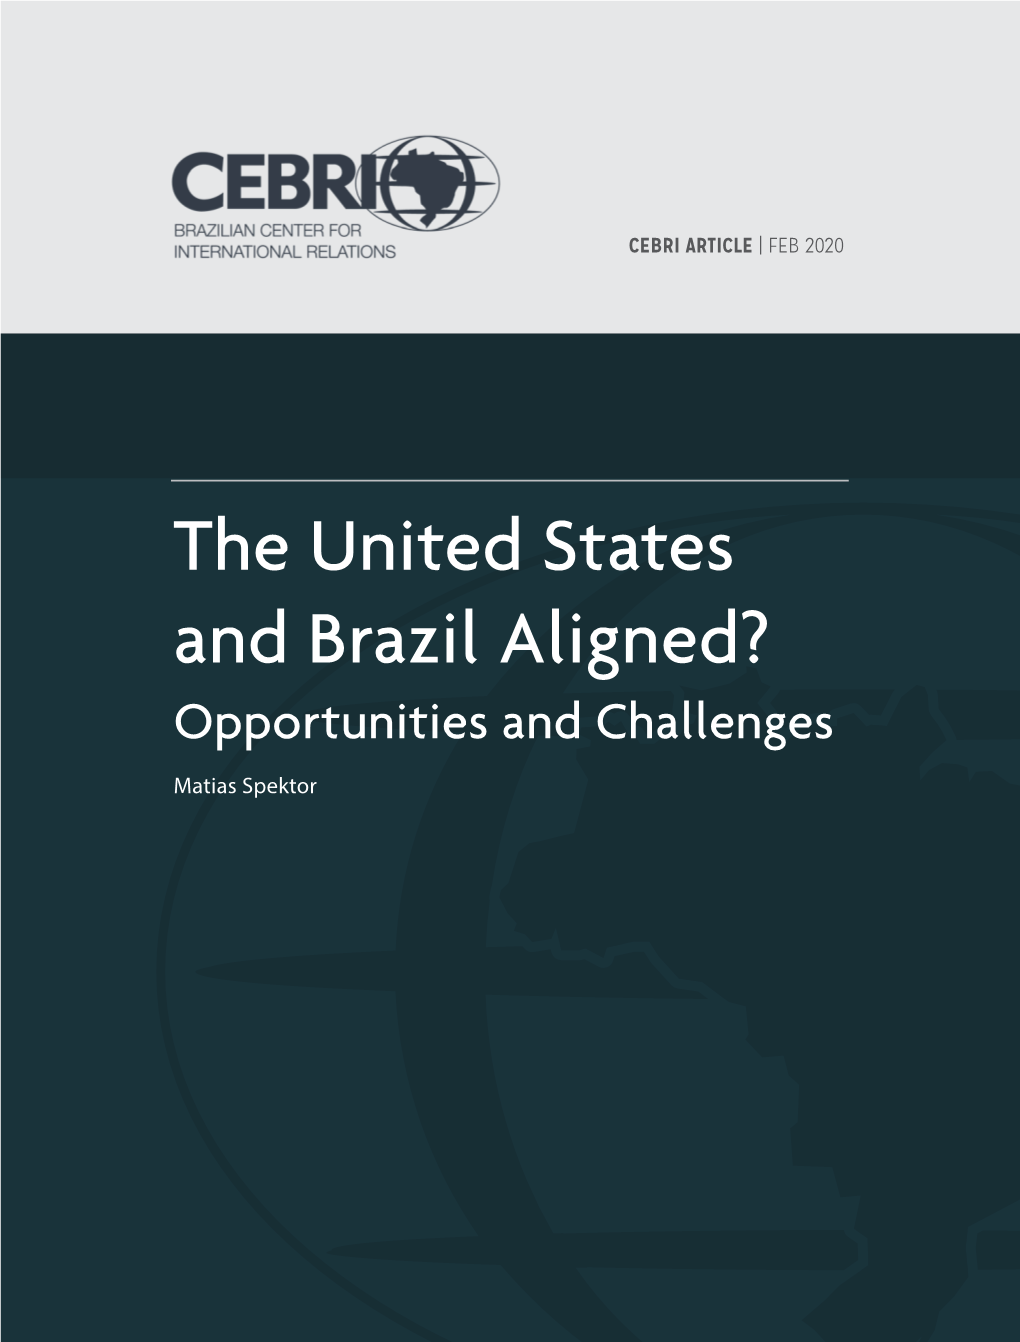 The United States and Brazil Aligned? Opportunities and Challenges